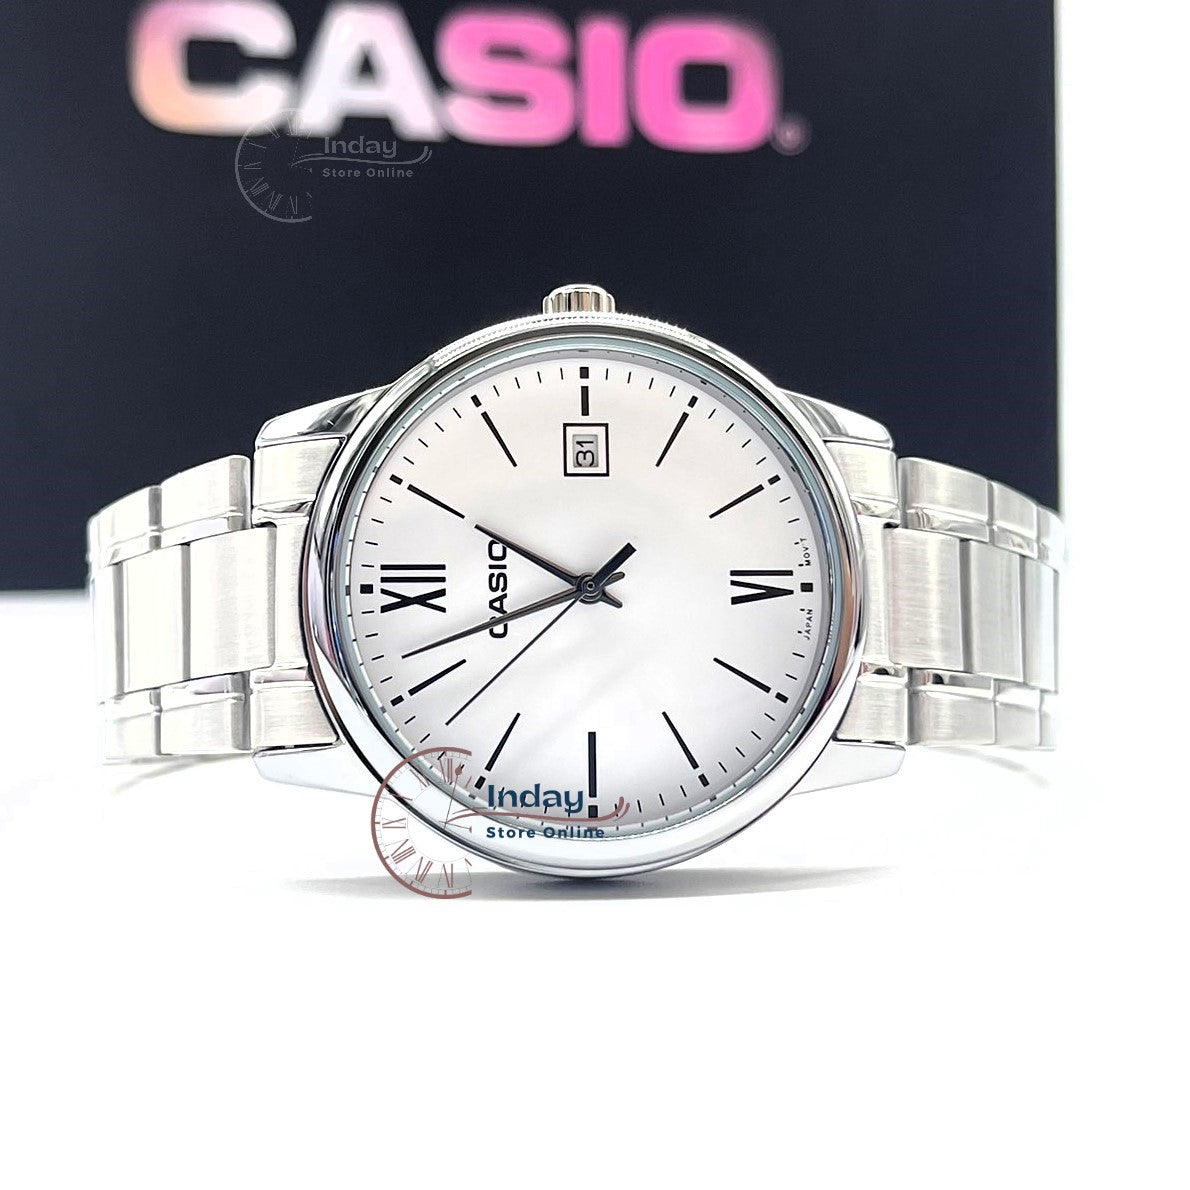 Casio Standard Men's Watch MTP-V002D-7B3 Analog Stainless Steel Band Triple-fold Clasp Mineral Glass